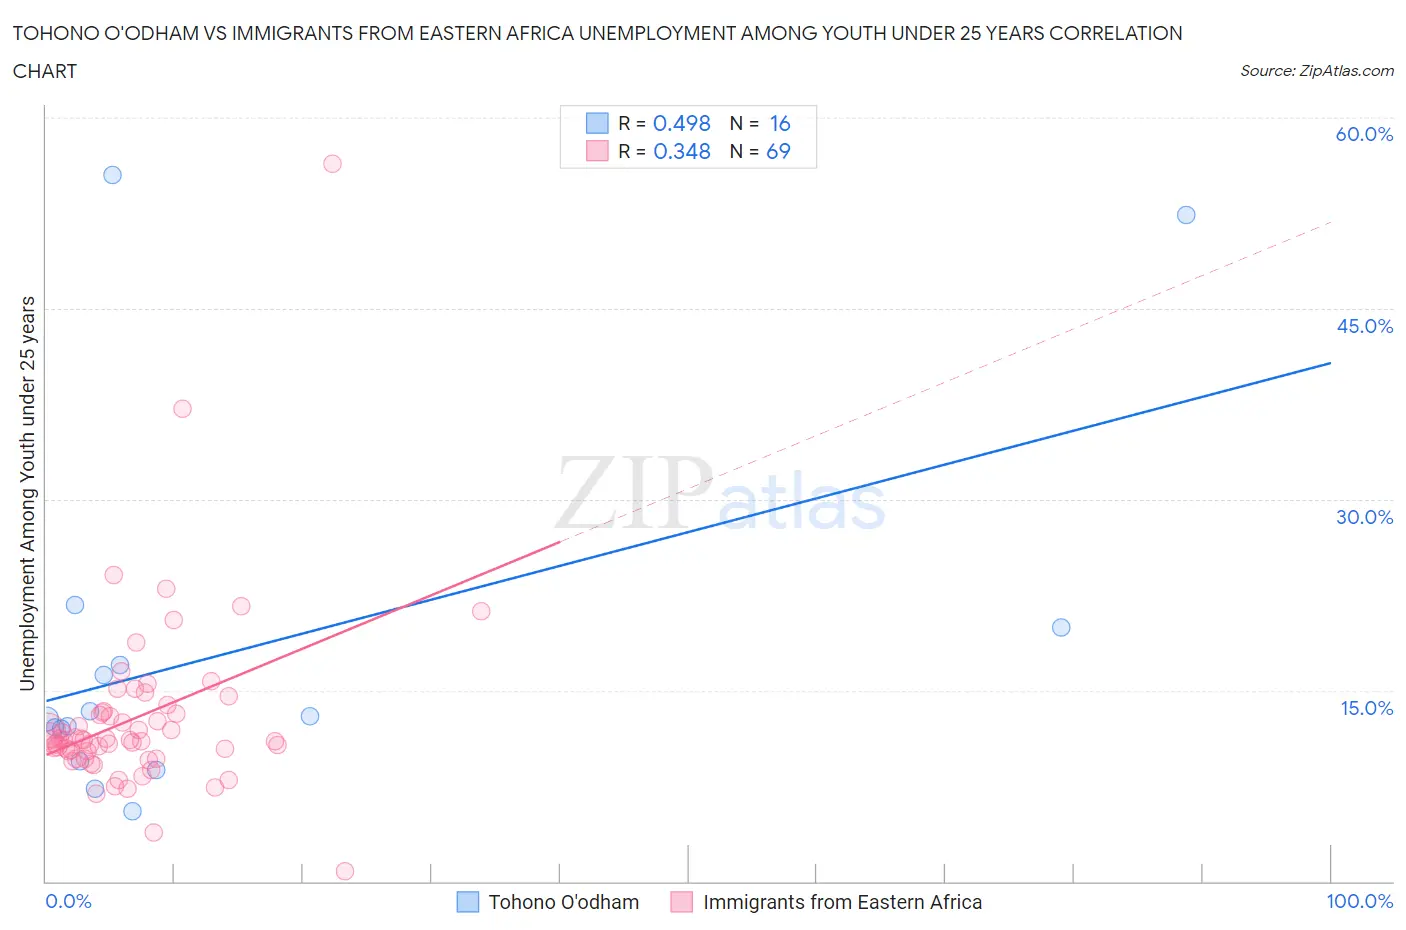 Tohono O'odham vs Immigrants from Eastern Africa Unemployment Among Youth under 25 years